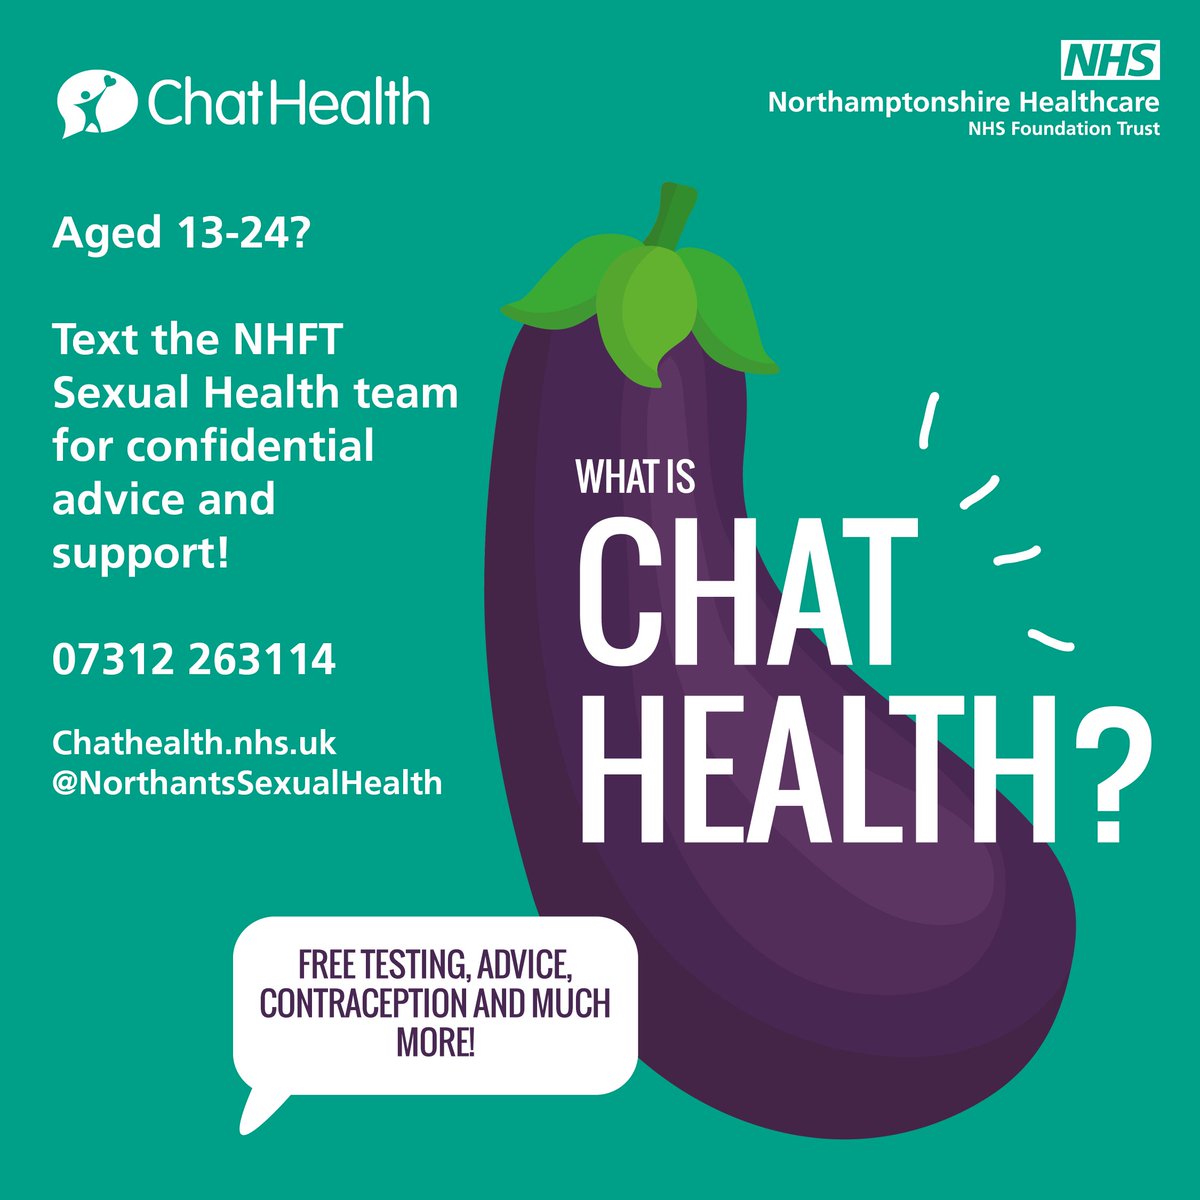 ChatHealth #sexualhealth is FREE SMS support (13-24yr olds)
Click on: @NorthantsSexualHealth via
chathealth.nhs.uk/start-a-chat/h…
#confidential #safersex @ChatHealthNHS